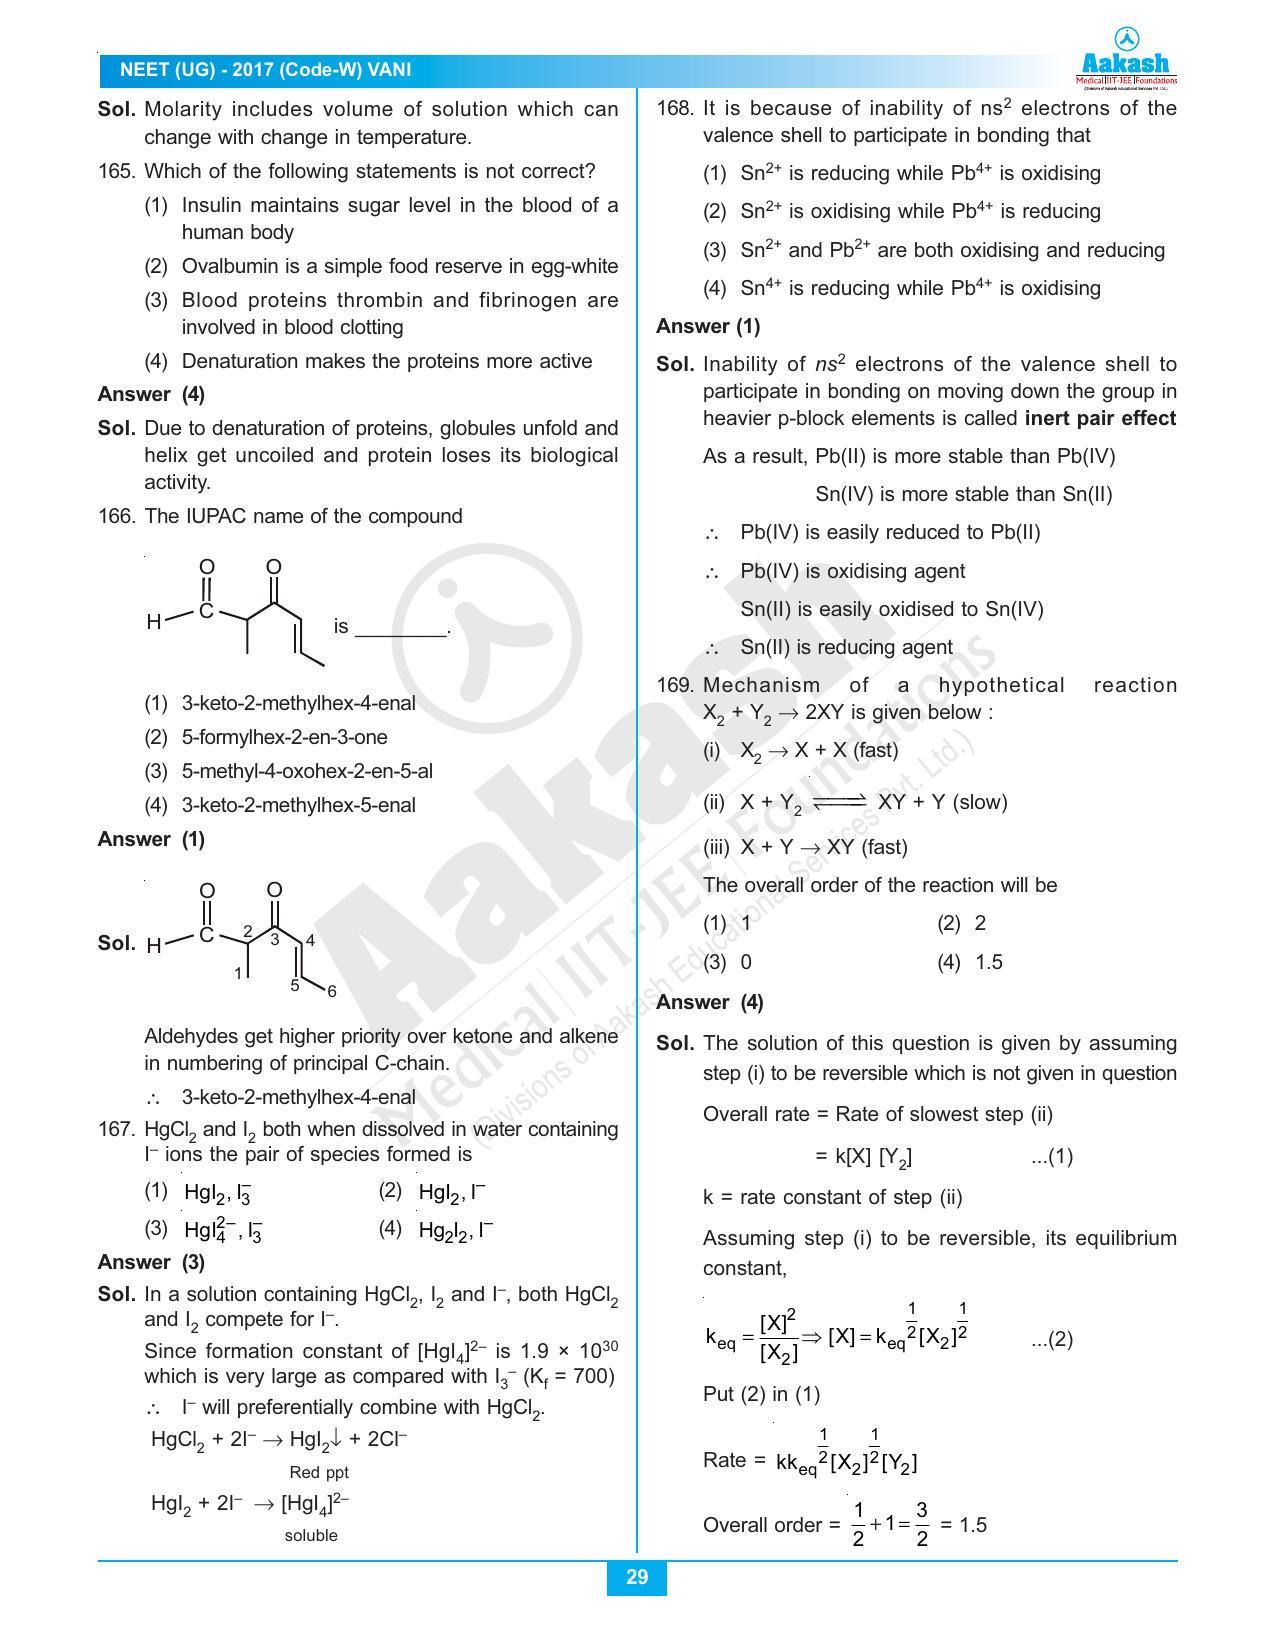  NEET Code W 2017 Answer & Solutions - Page 29